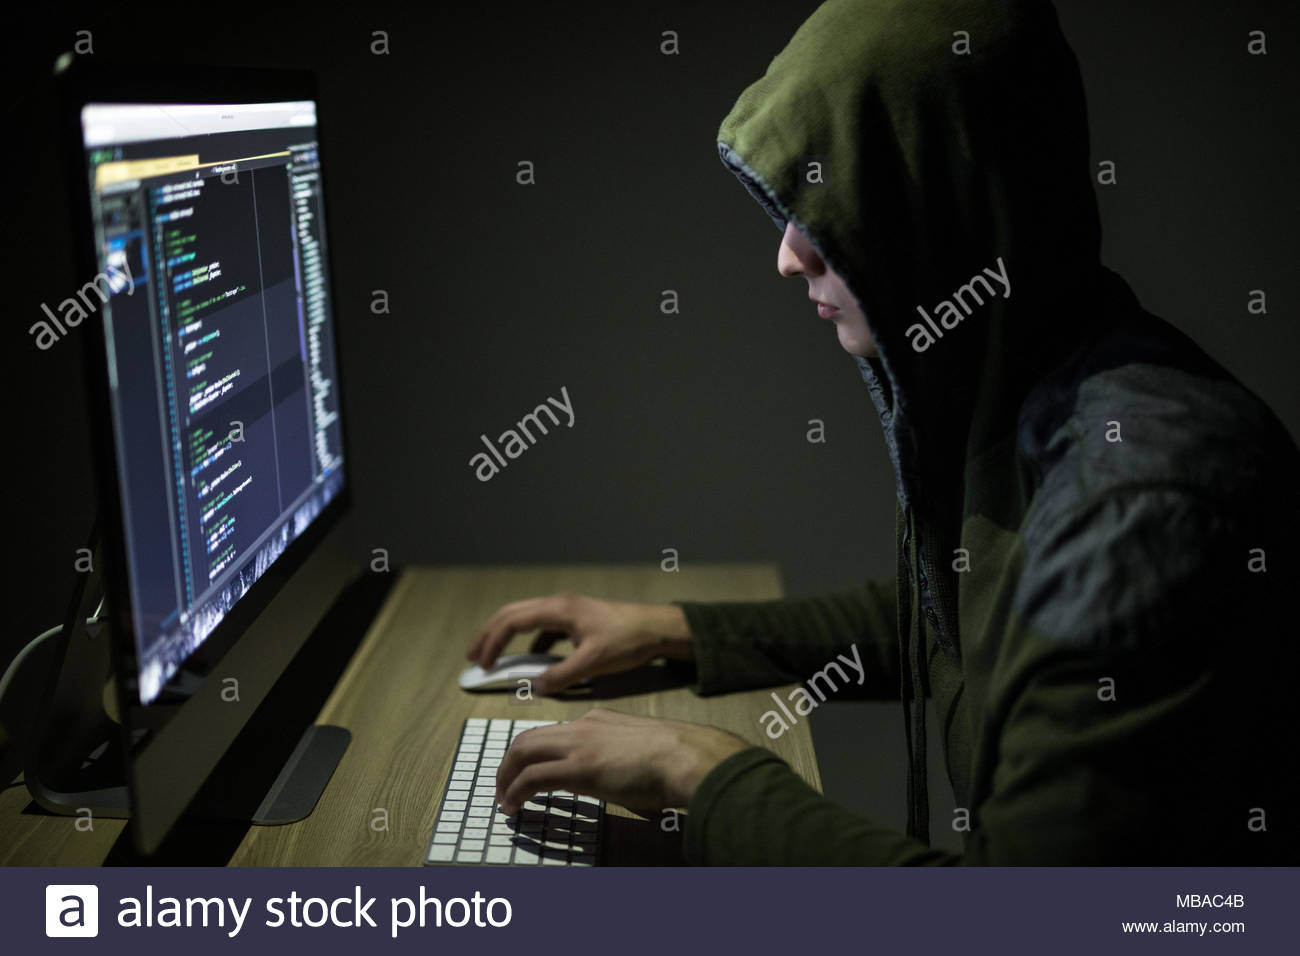 Hooded Puter Hacker Stealing Information With Pc Dark